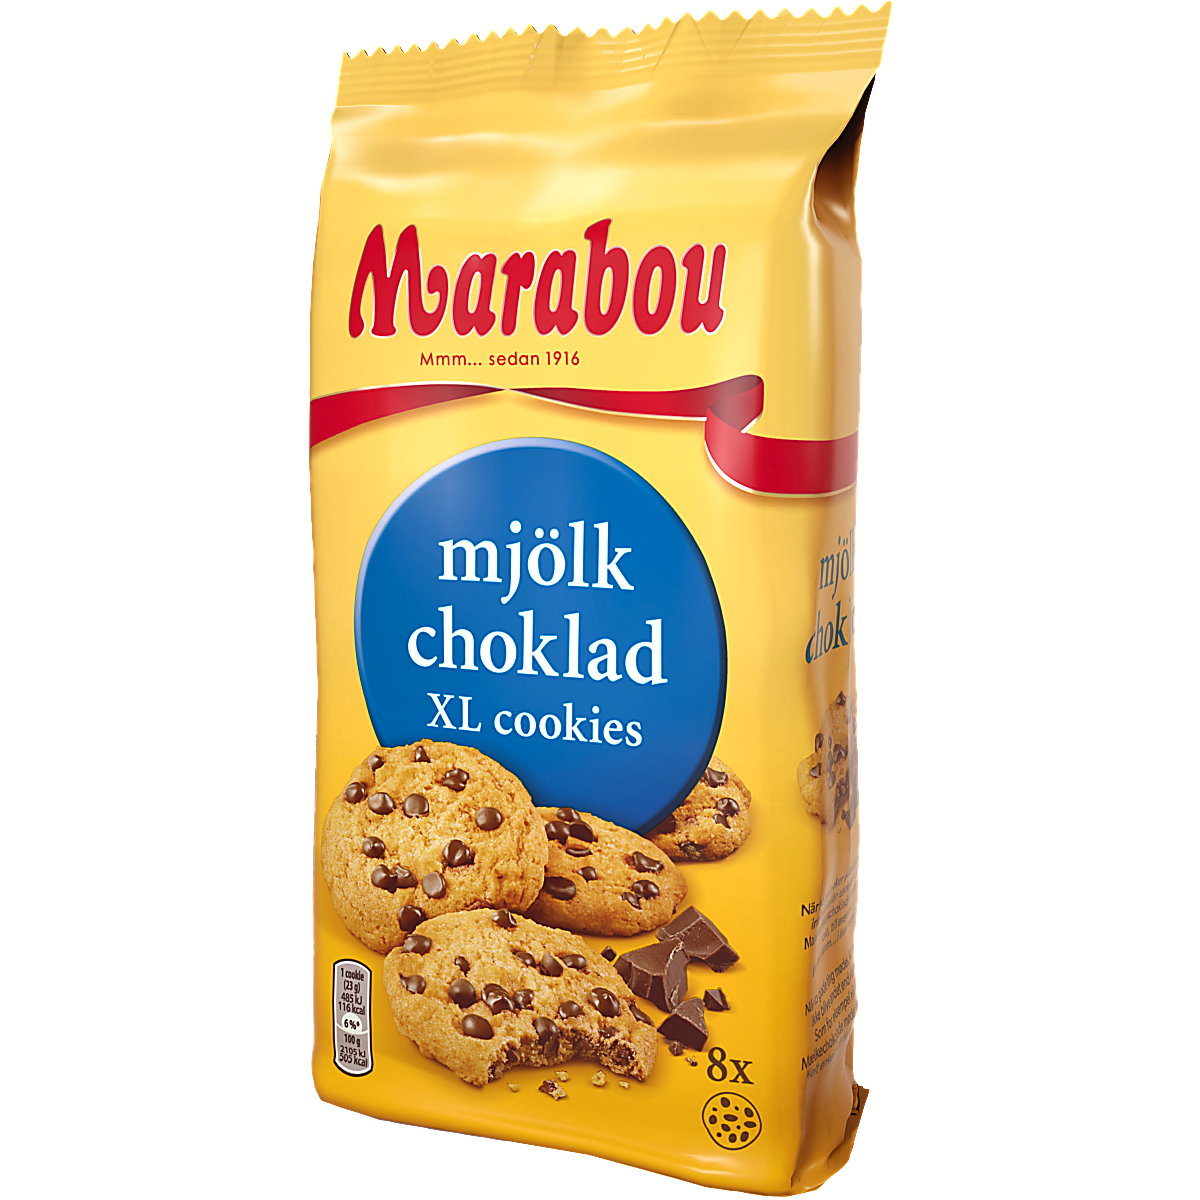 Marabou Milk Chocolate XL Cookies by Sweet Side of Sweden